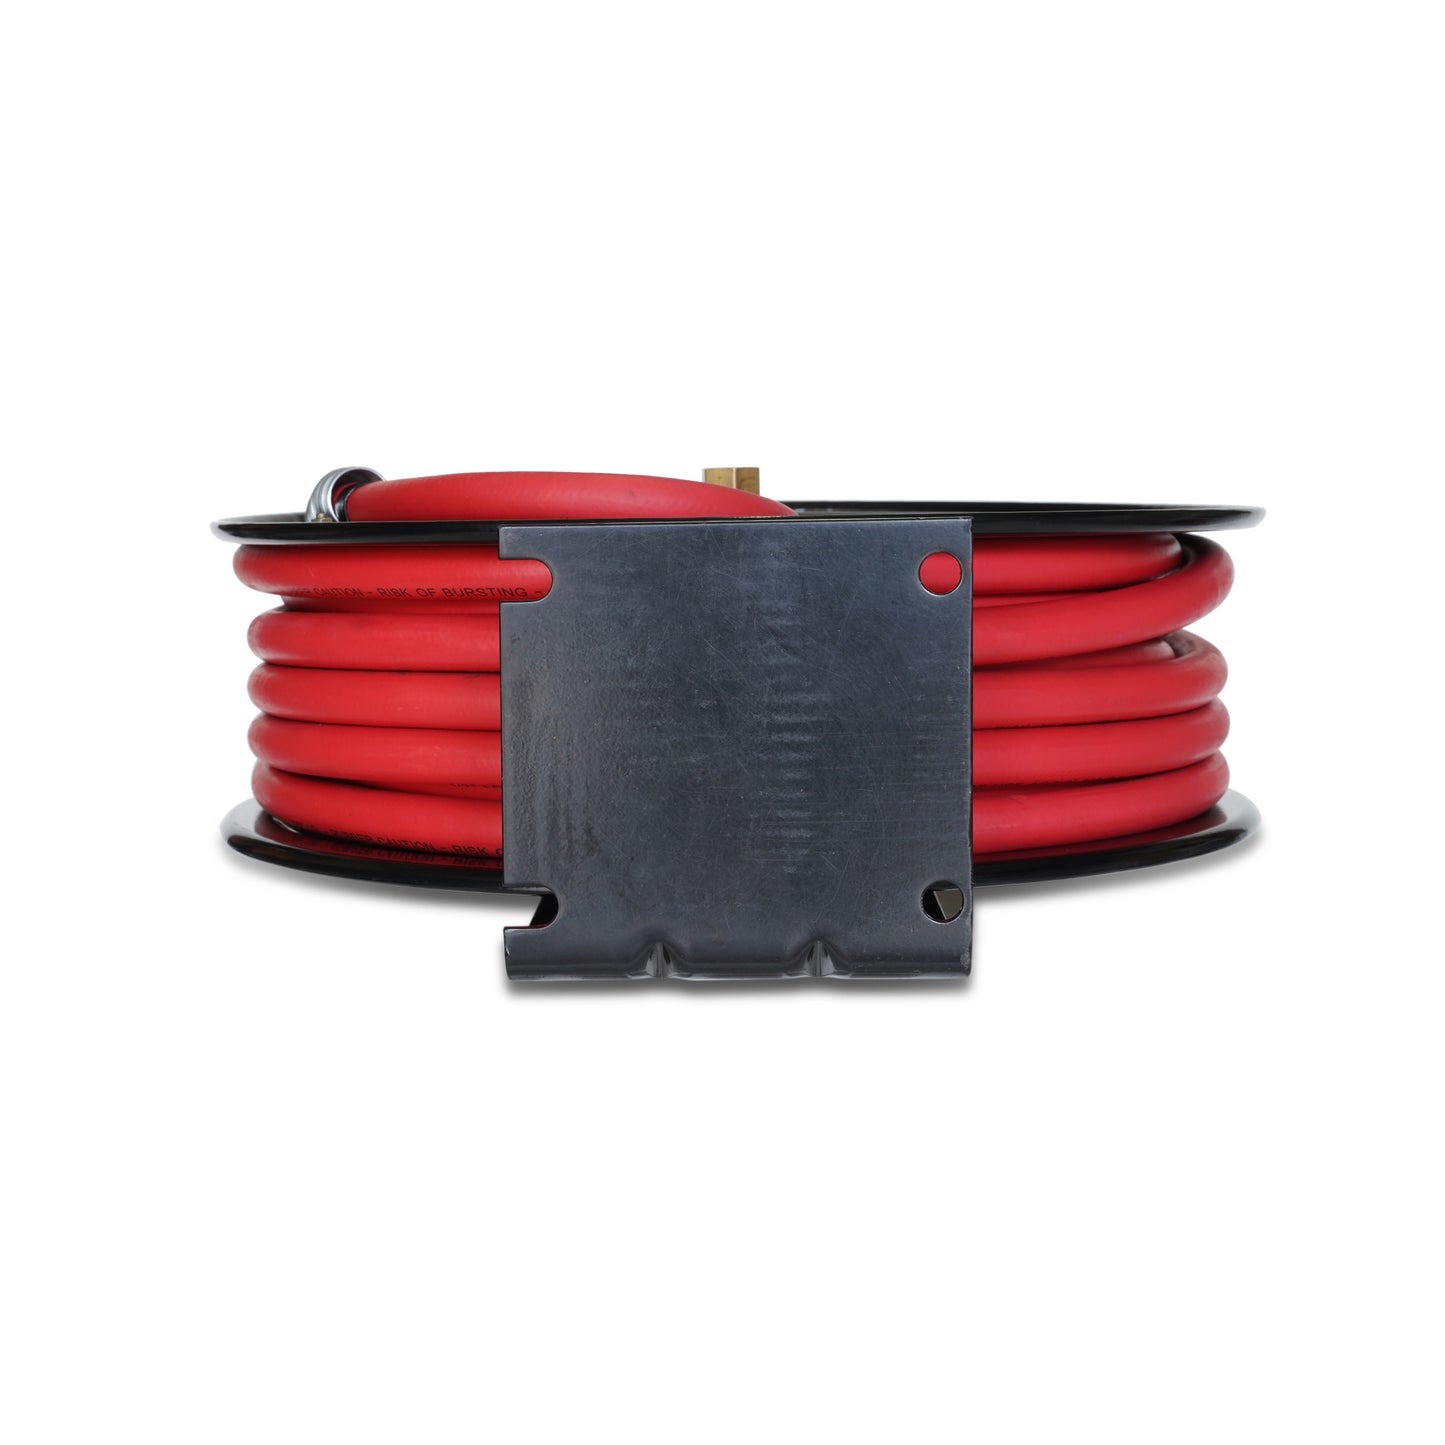 Enclosed Spring Pneumatic Hose Reel with 50-Foot Hose